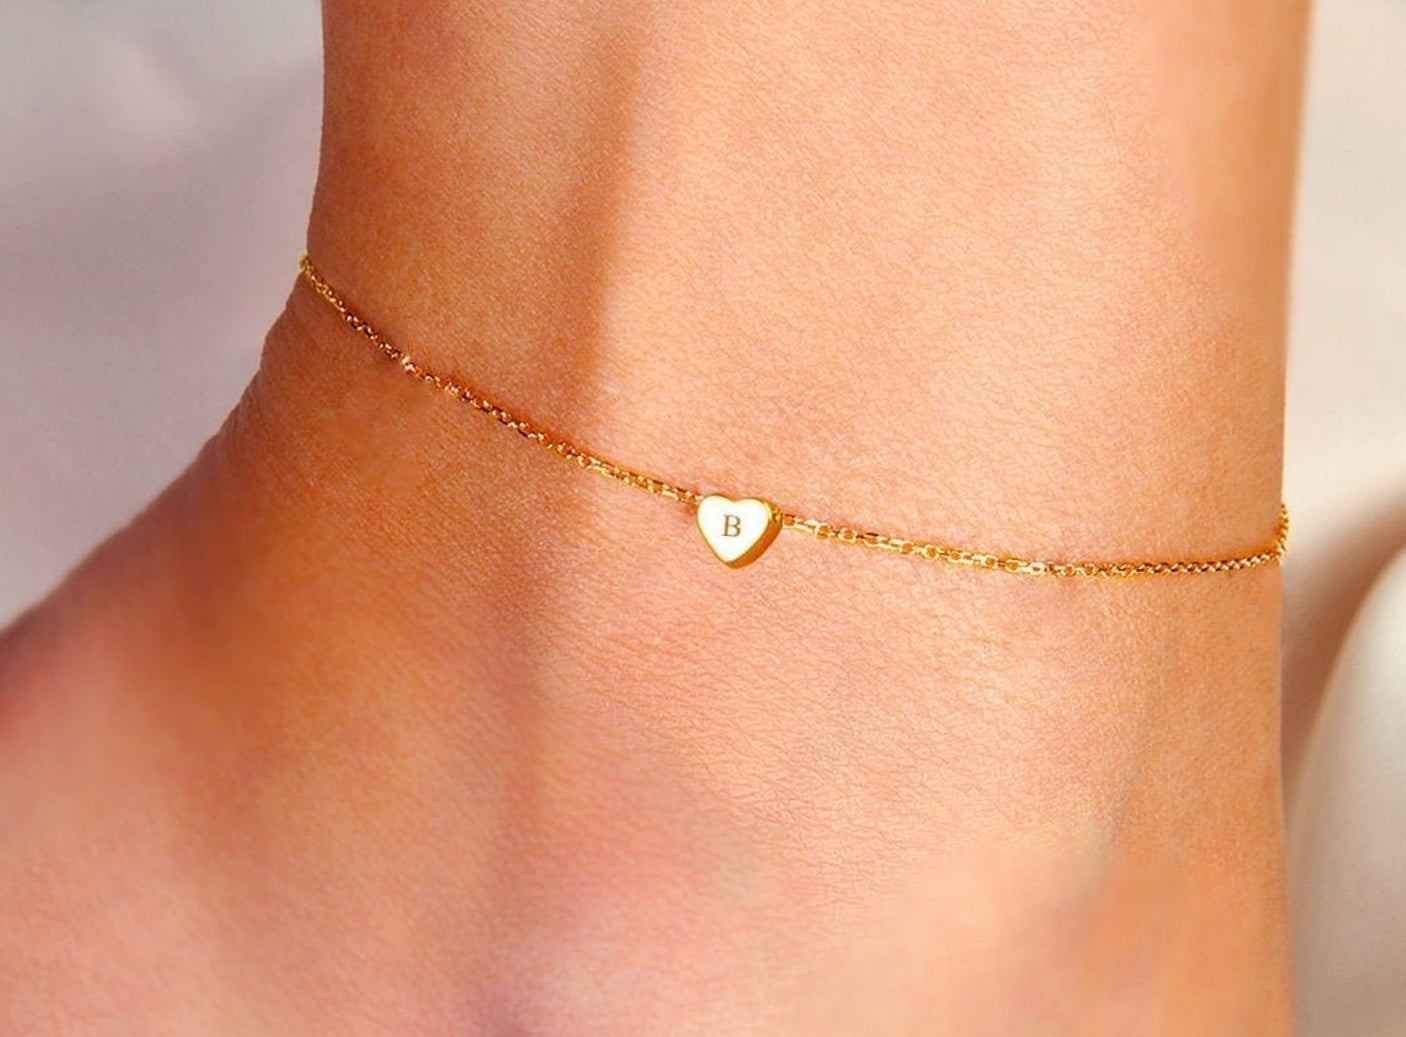 A small anklet with a monogrammed heart charm.